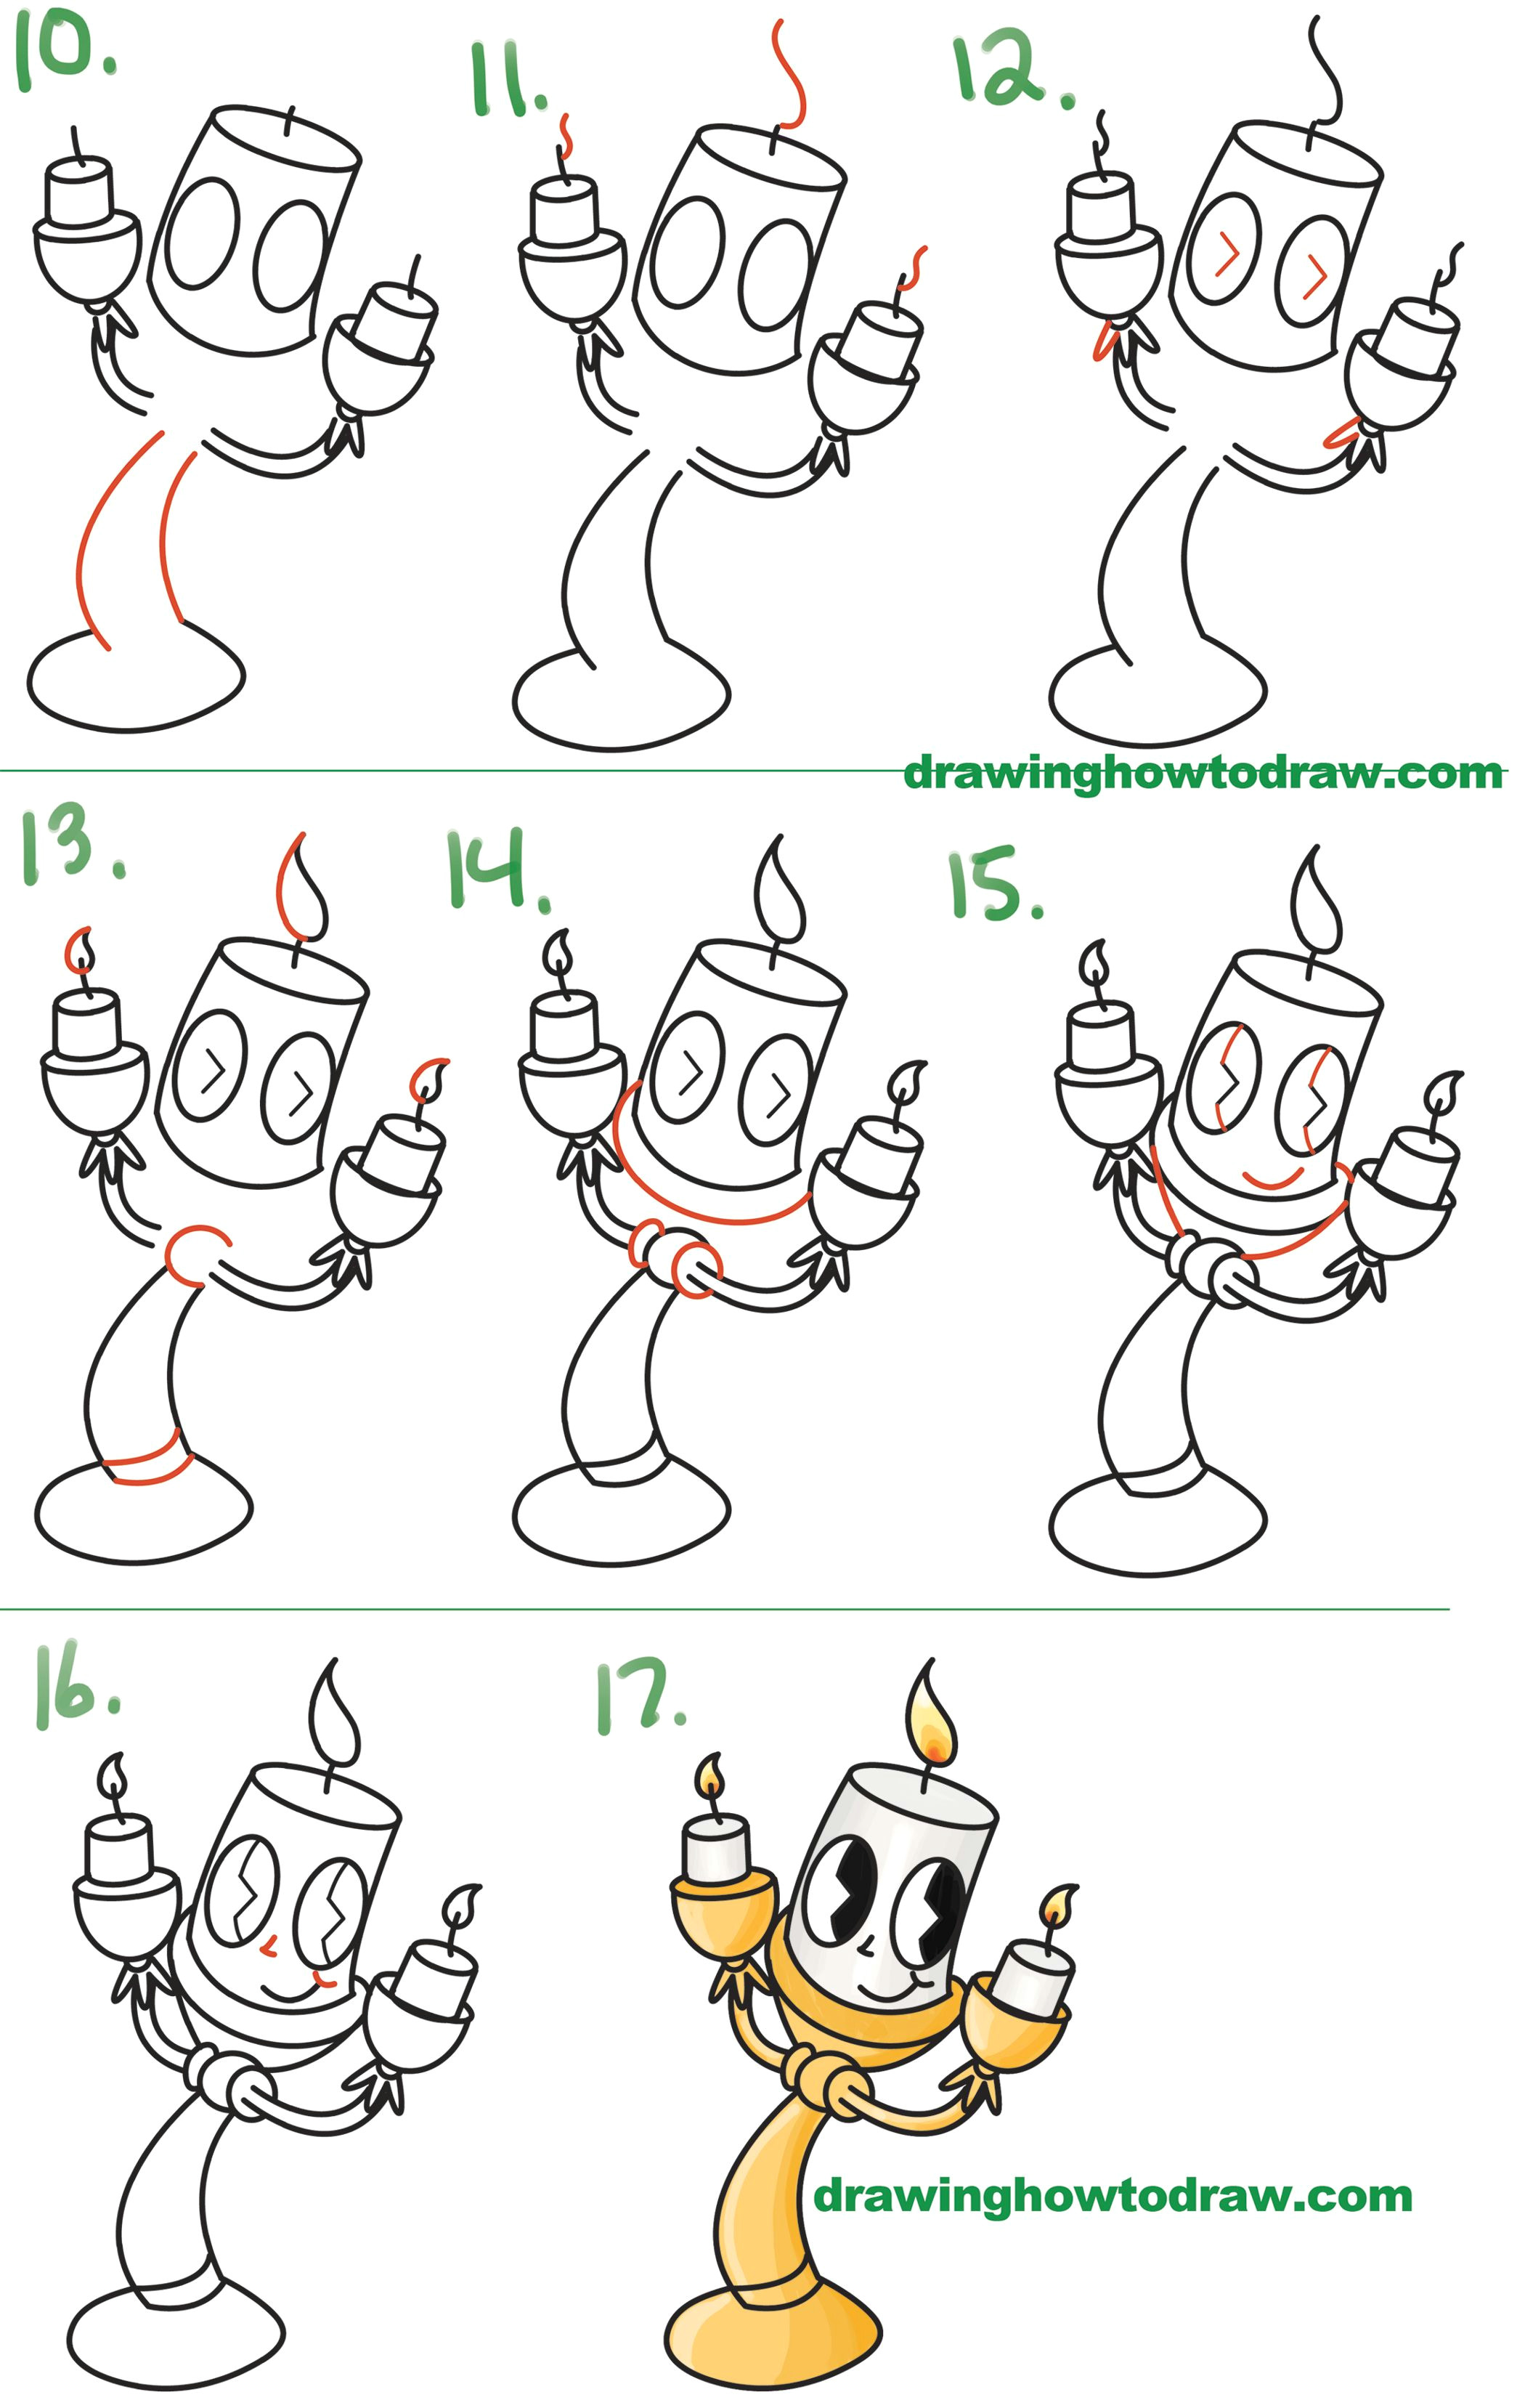 Easy Zombie Drawing Step by Step How to Draw Lumiere Cute Kawaii Chibi From Beauty and the Beast